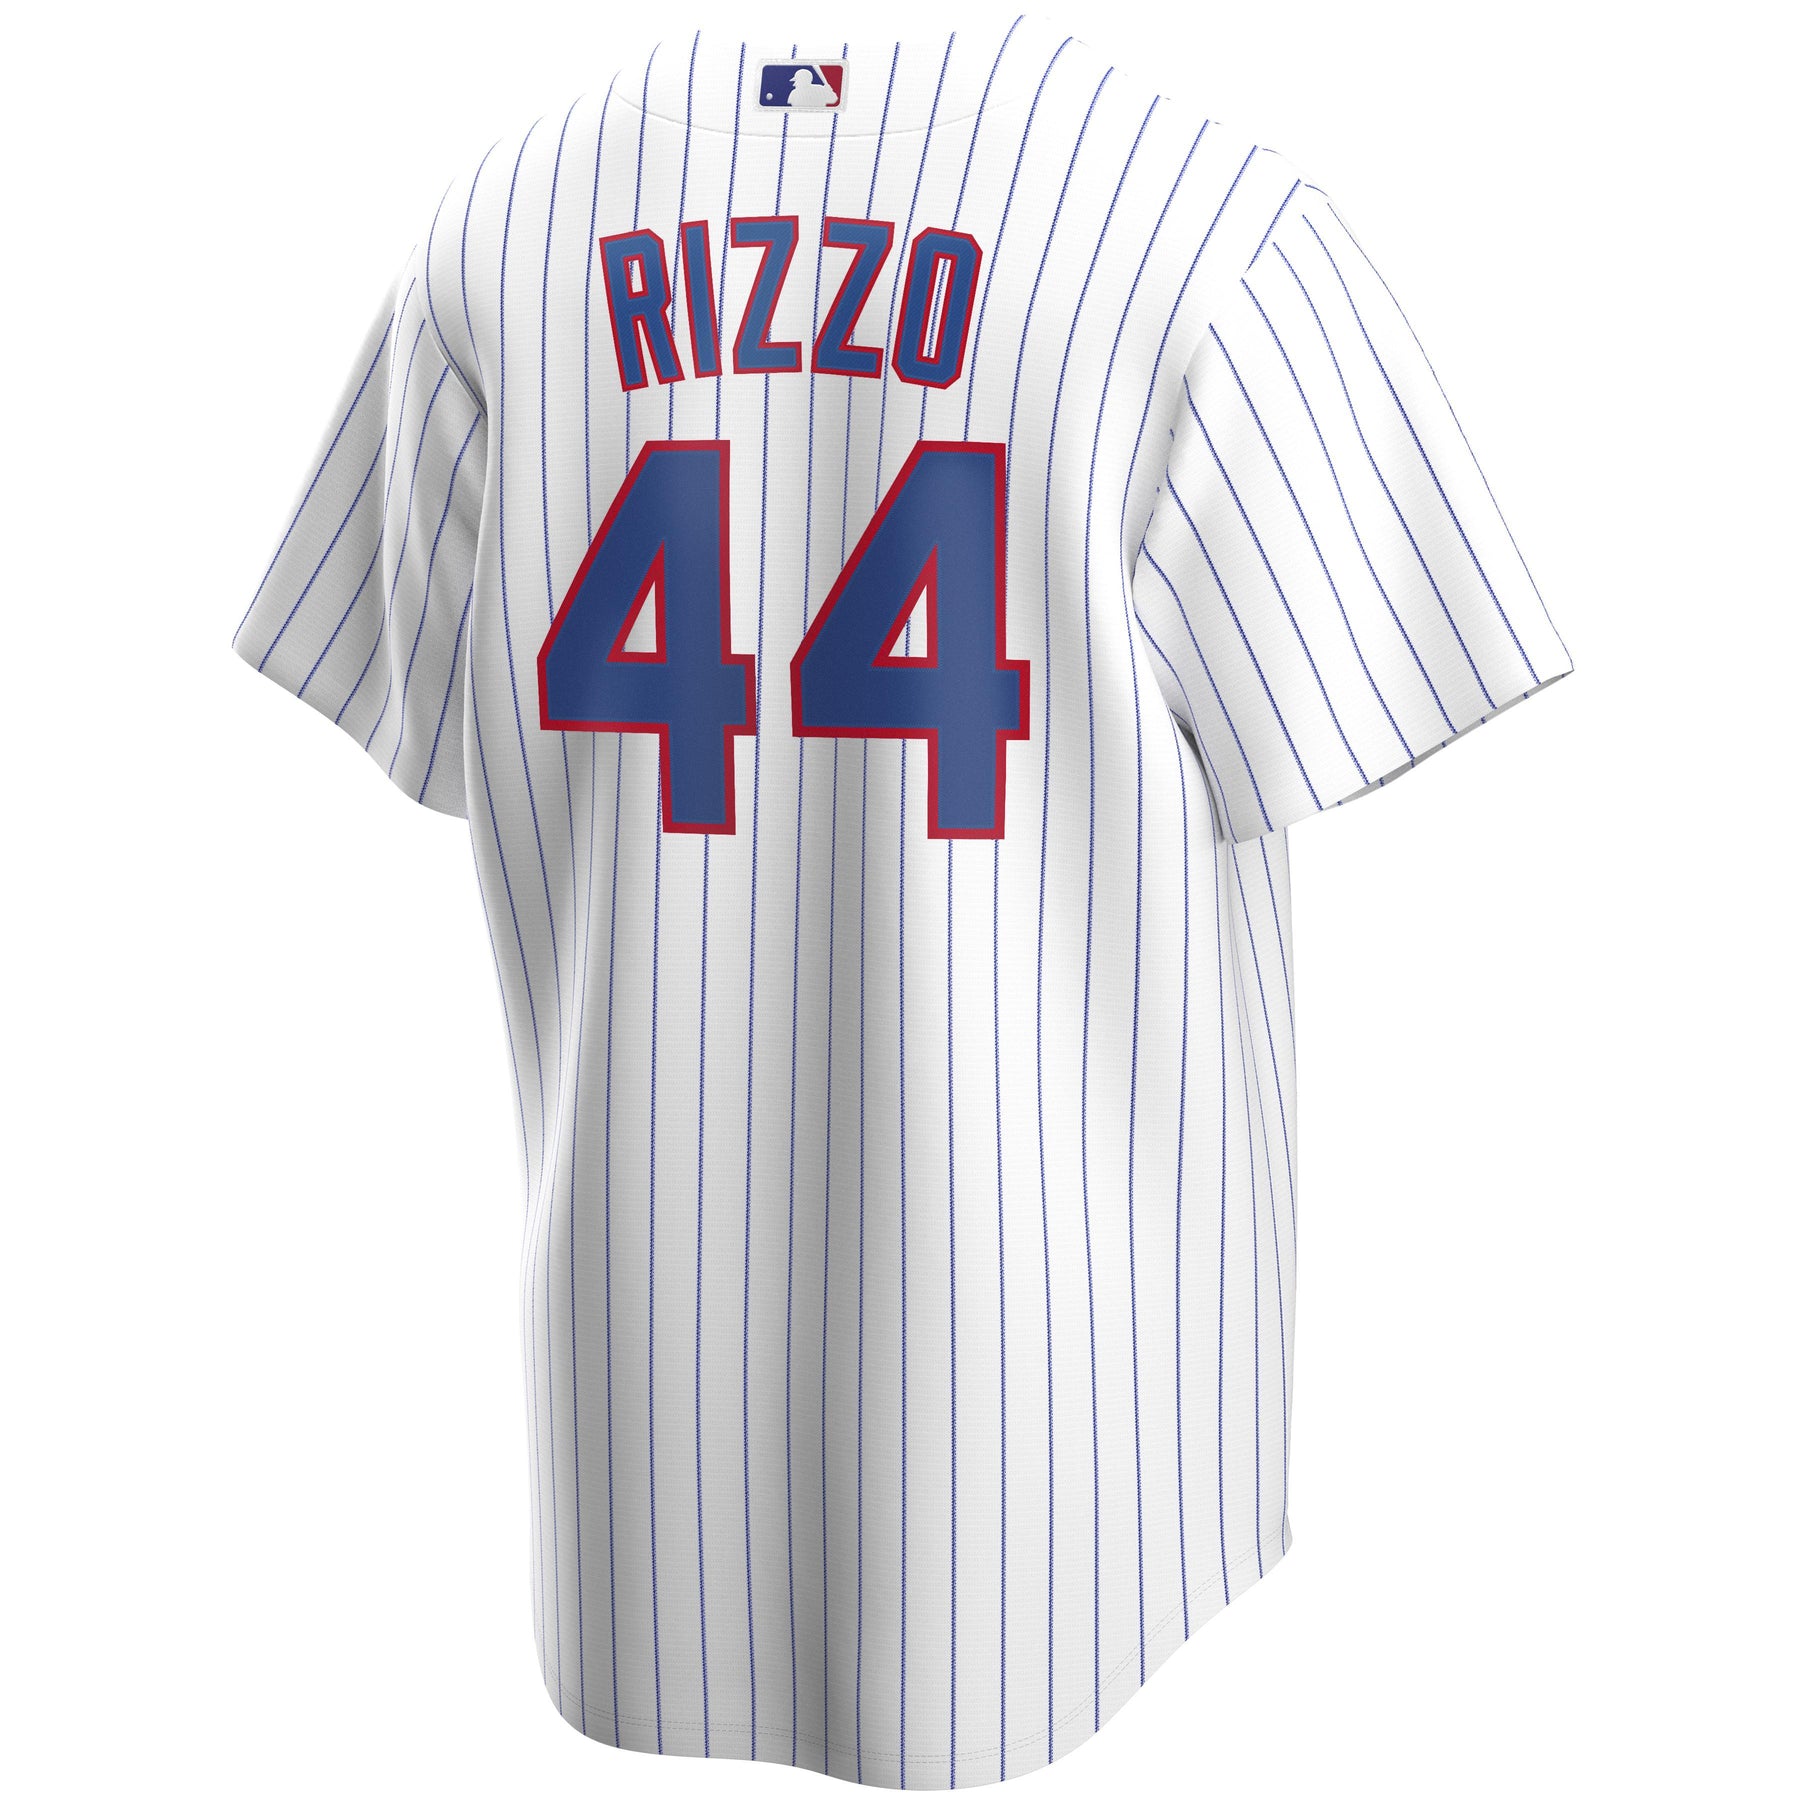 anthony rizzo replica jersey